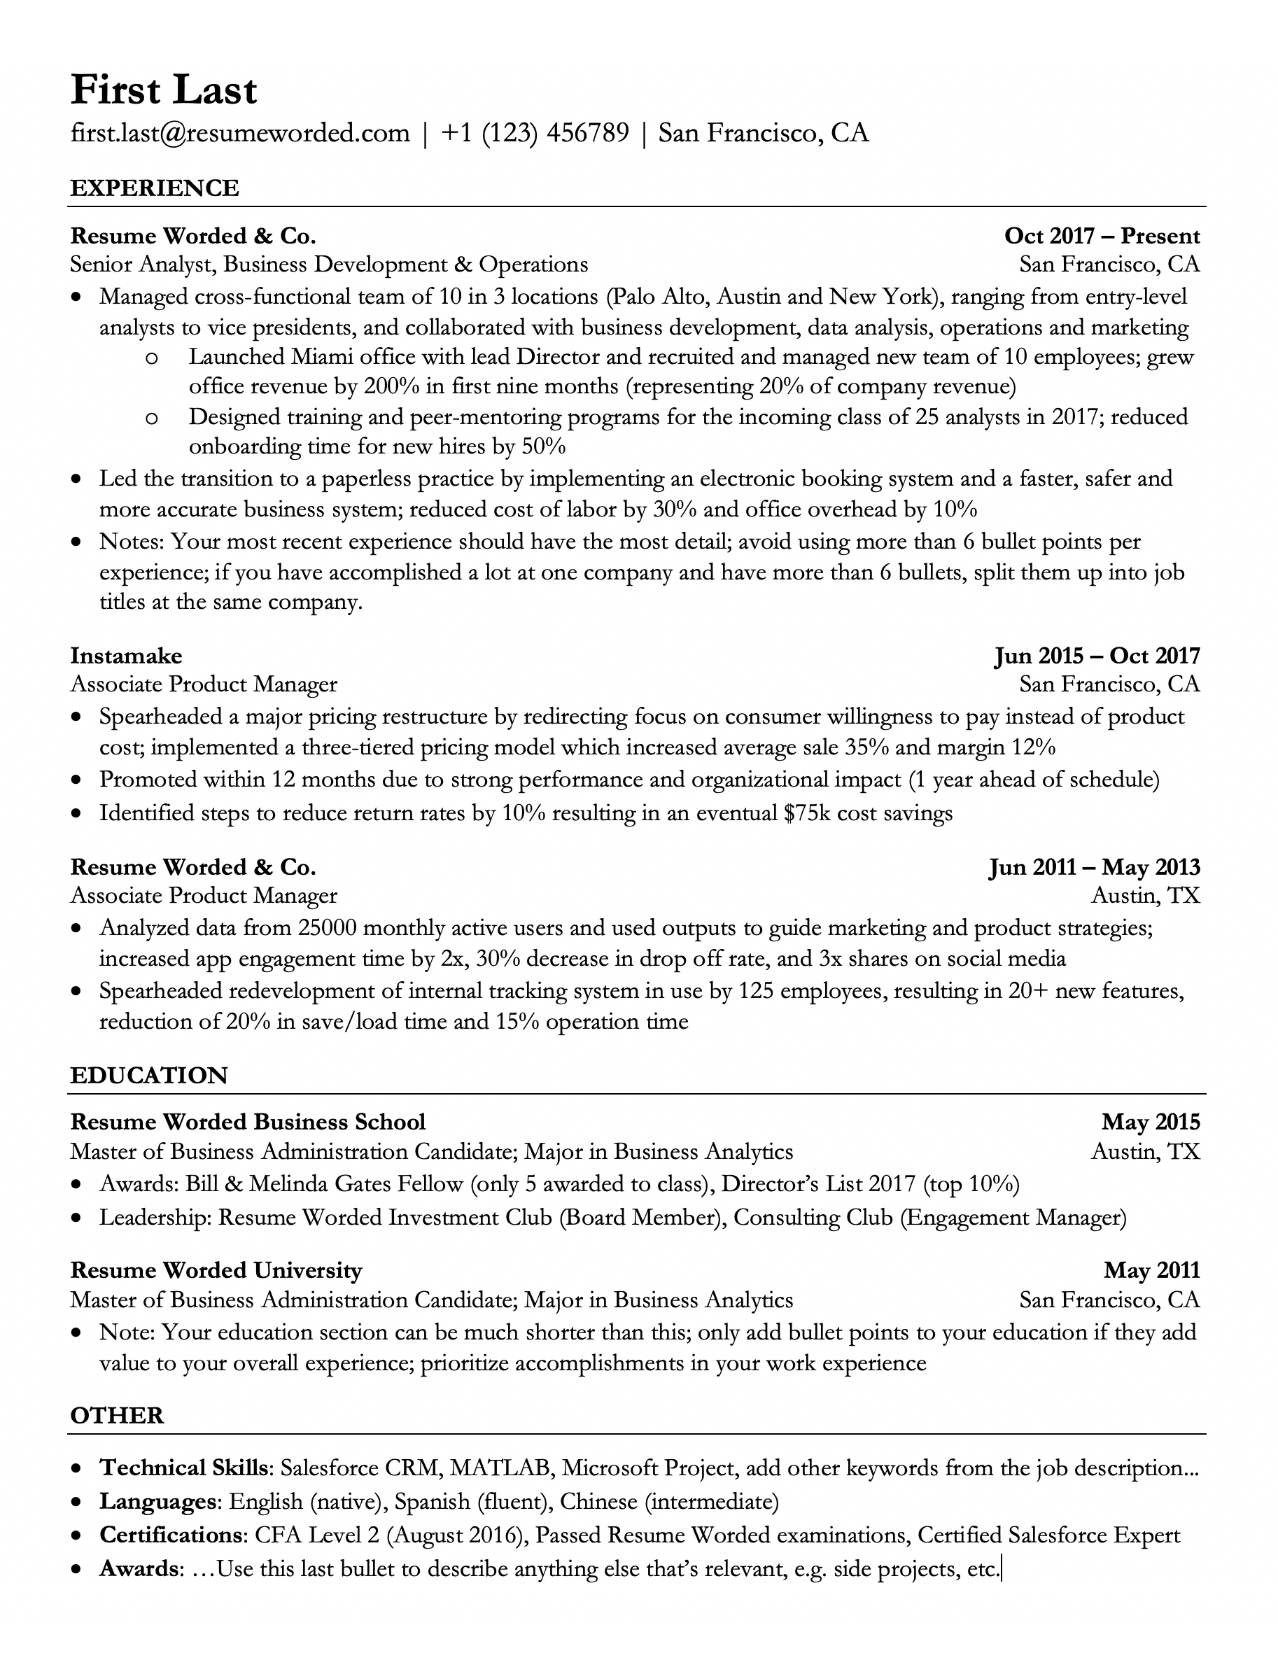 Unique Resume Template optimized for ATS